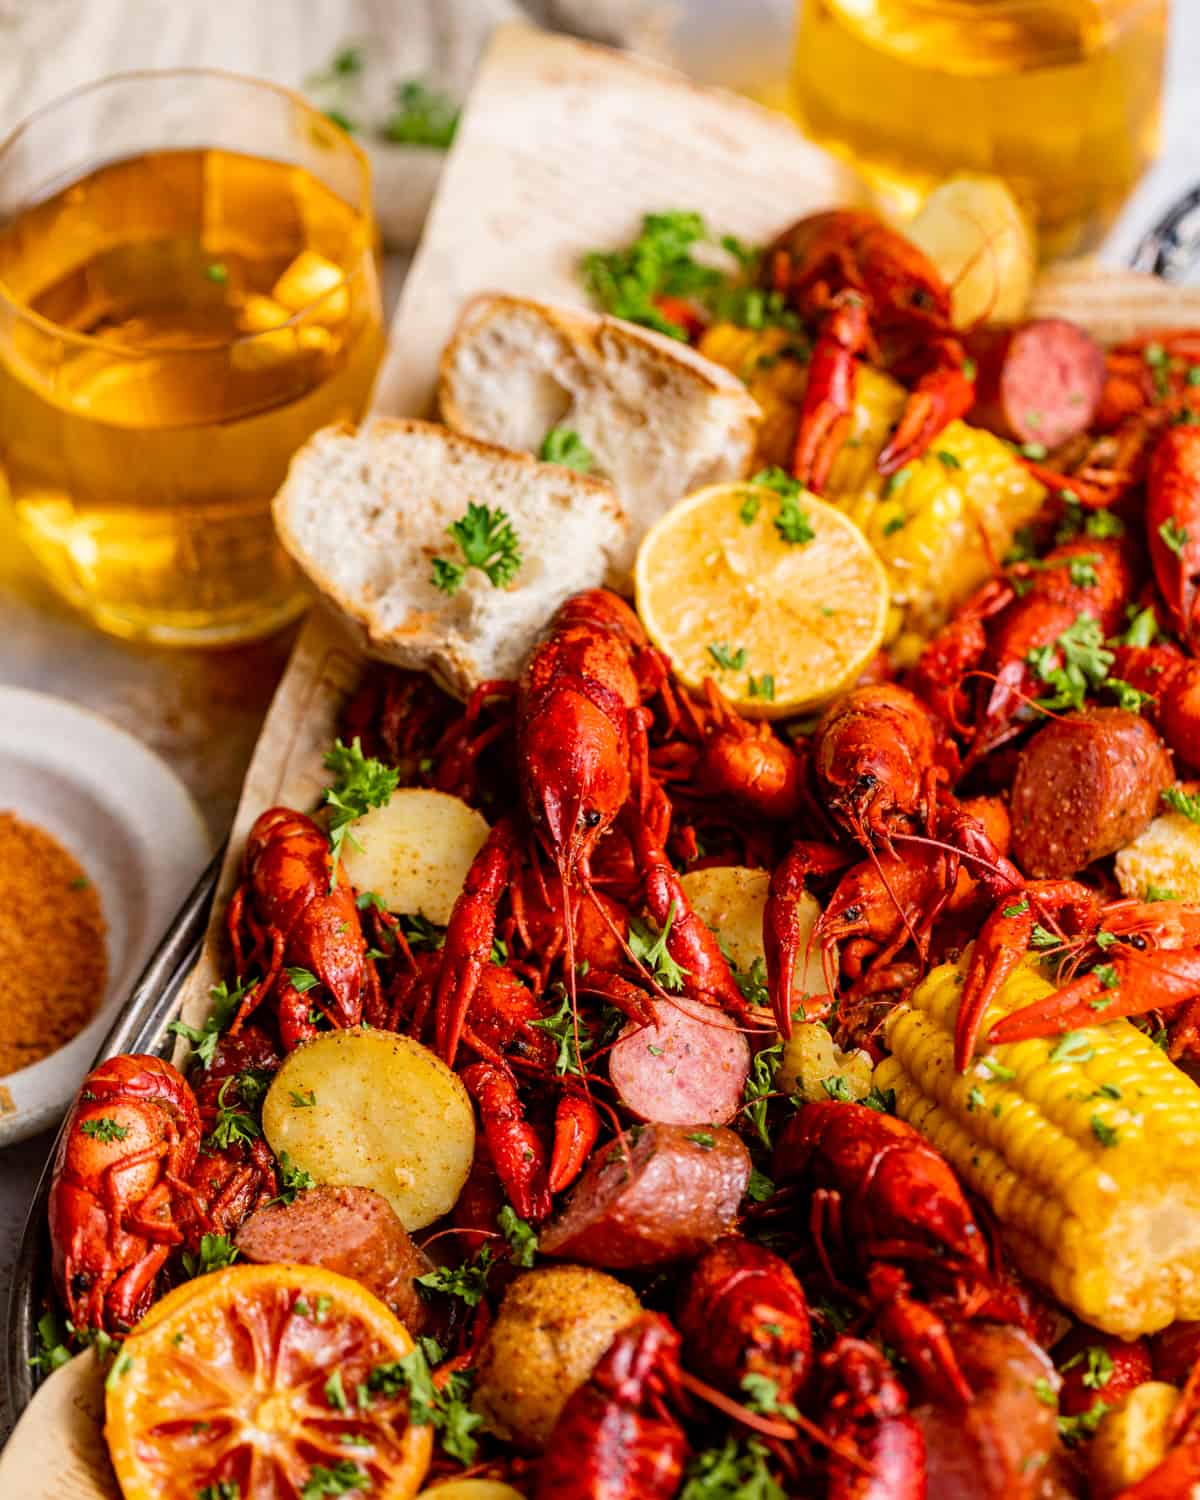 crawfish boil on a tray next to a glass of beer.